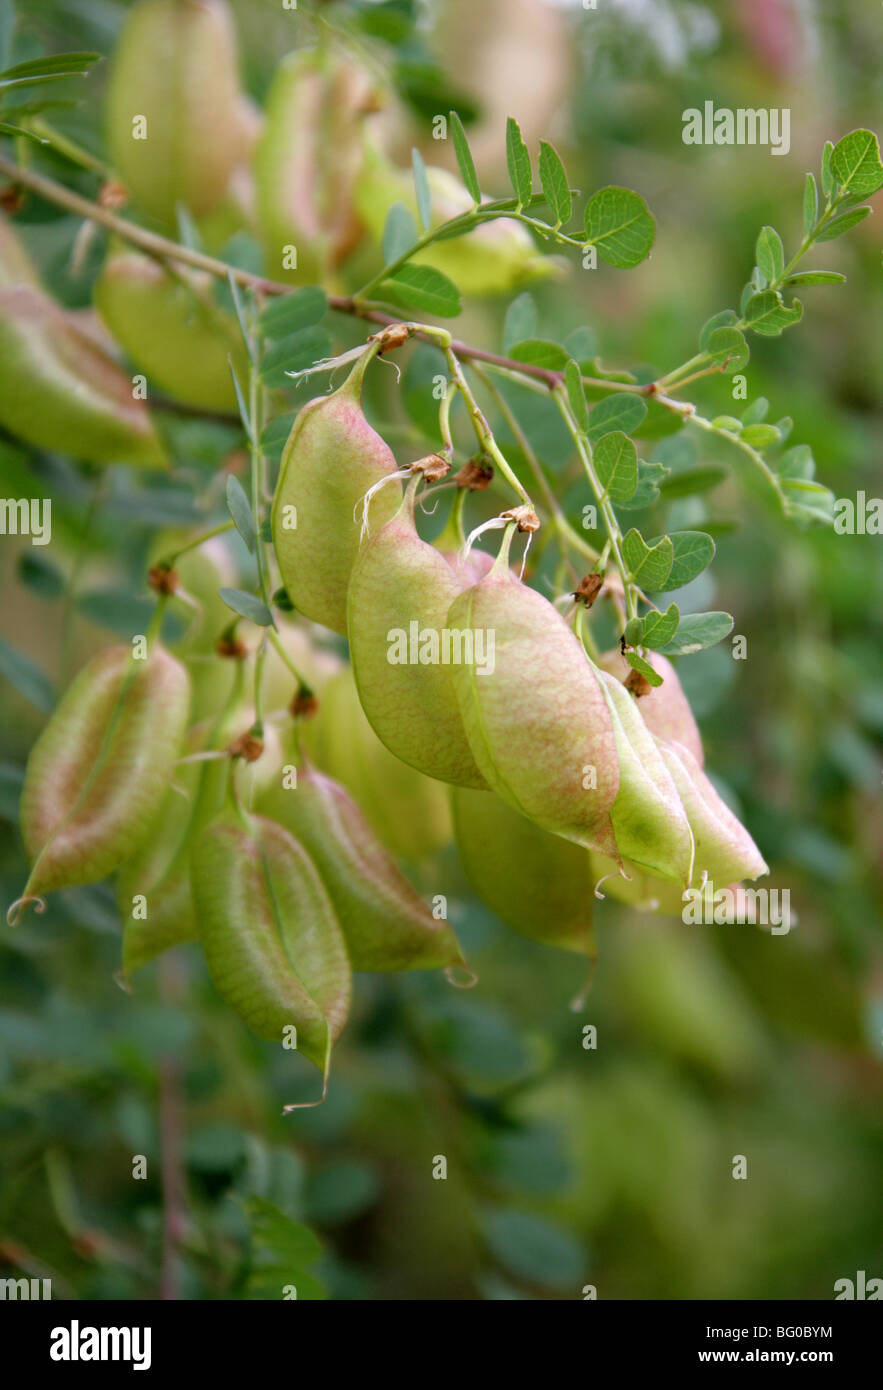 Common Bladder Senna, Colutea arborescens, Fabaceae, North and Central Mediterranean. Seed Pods. Stock Photo